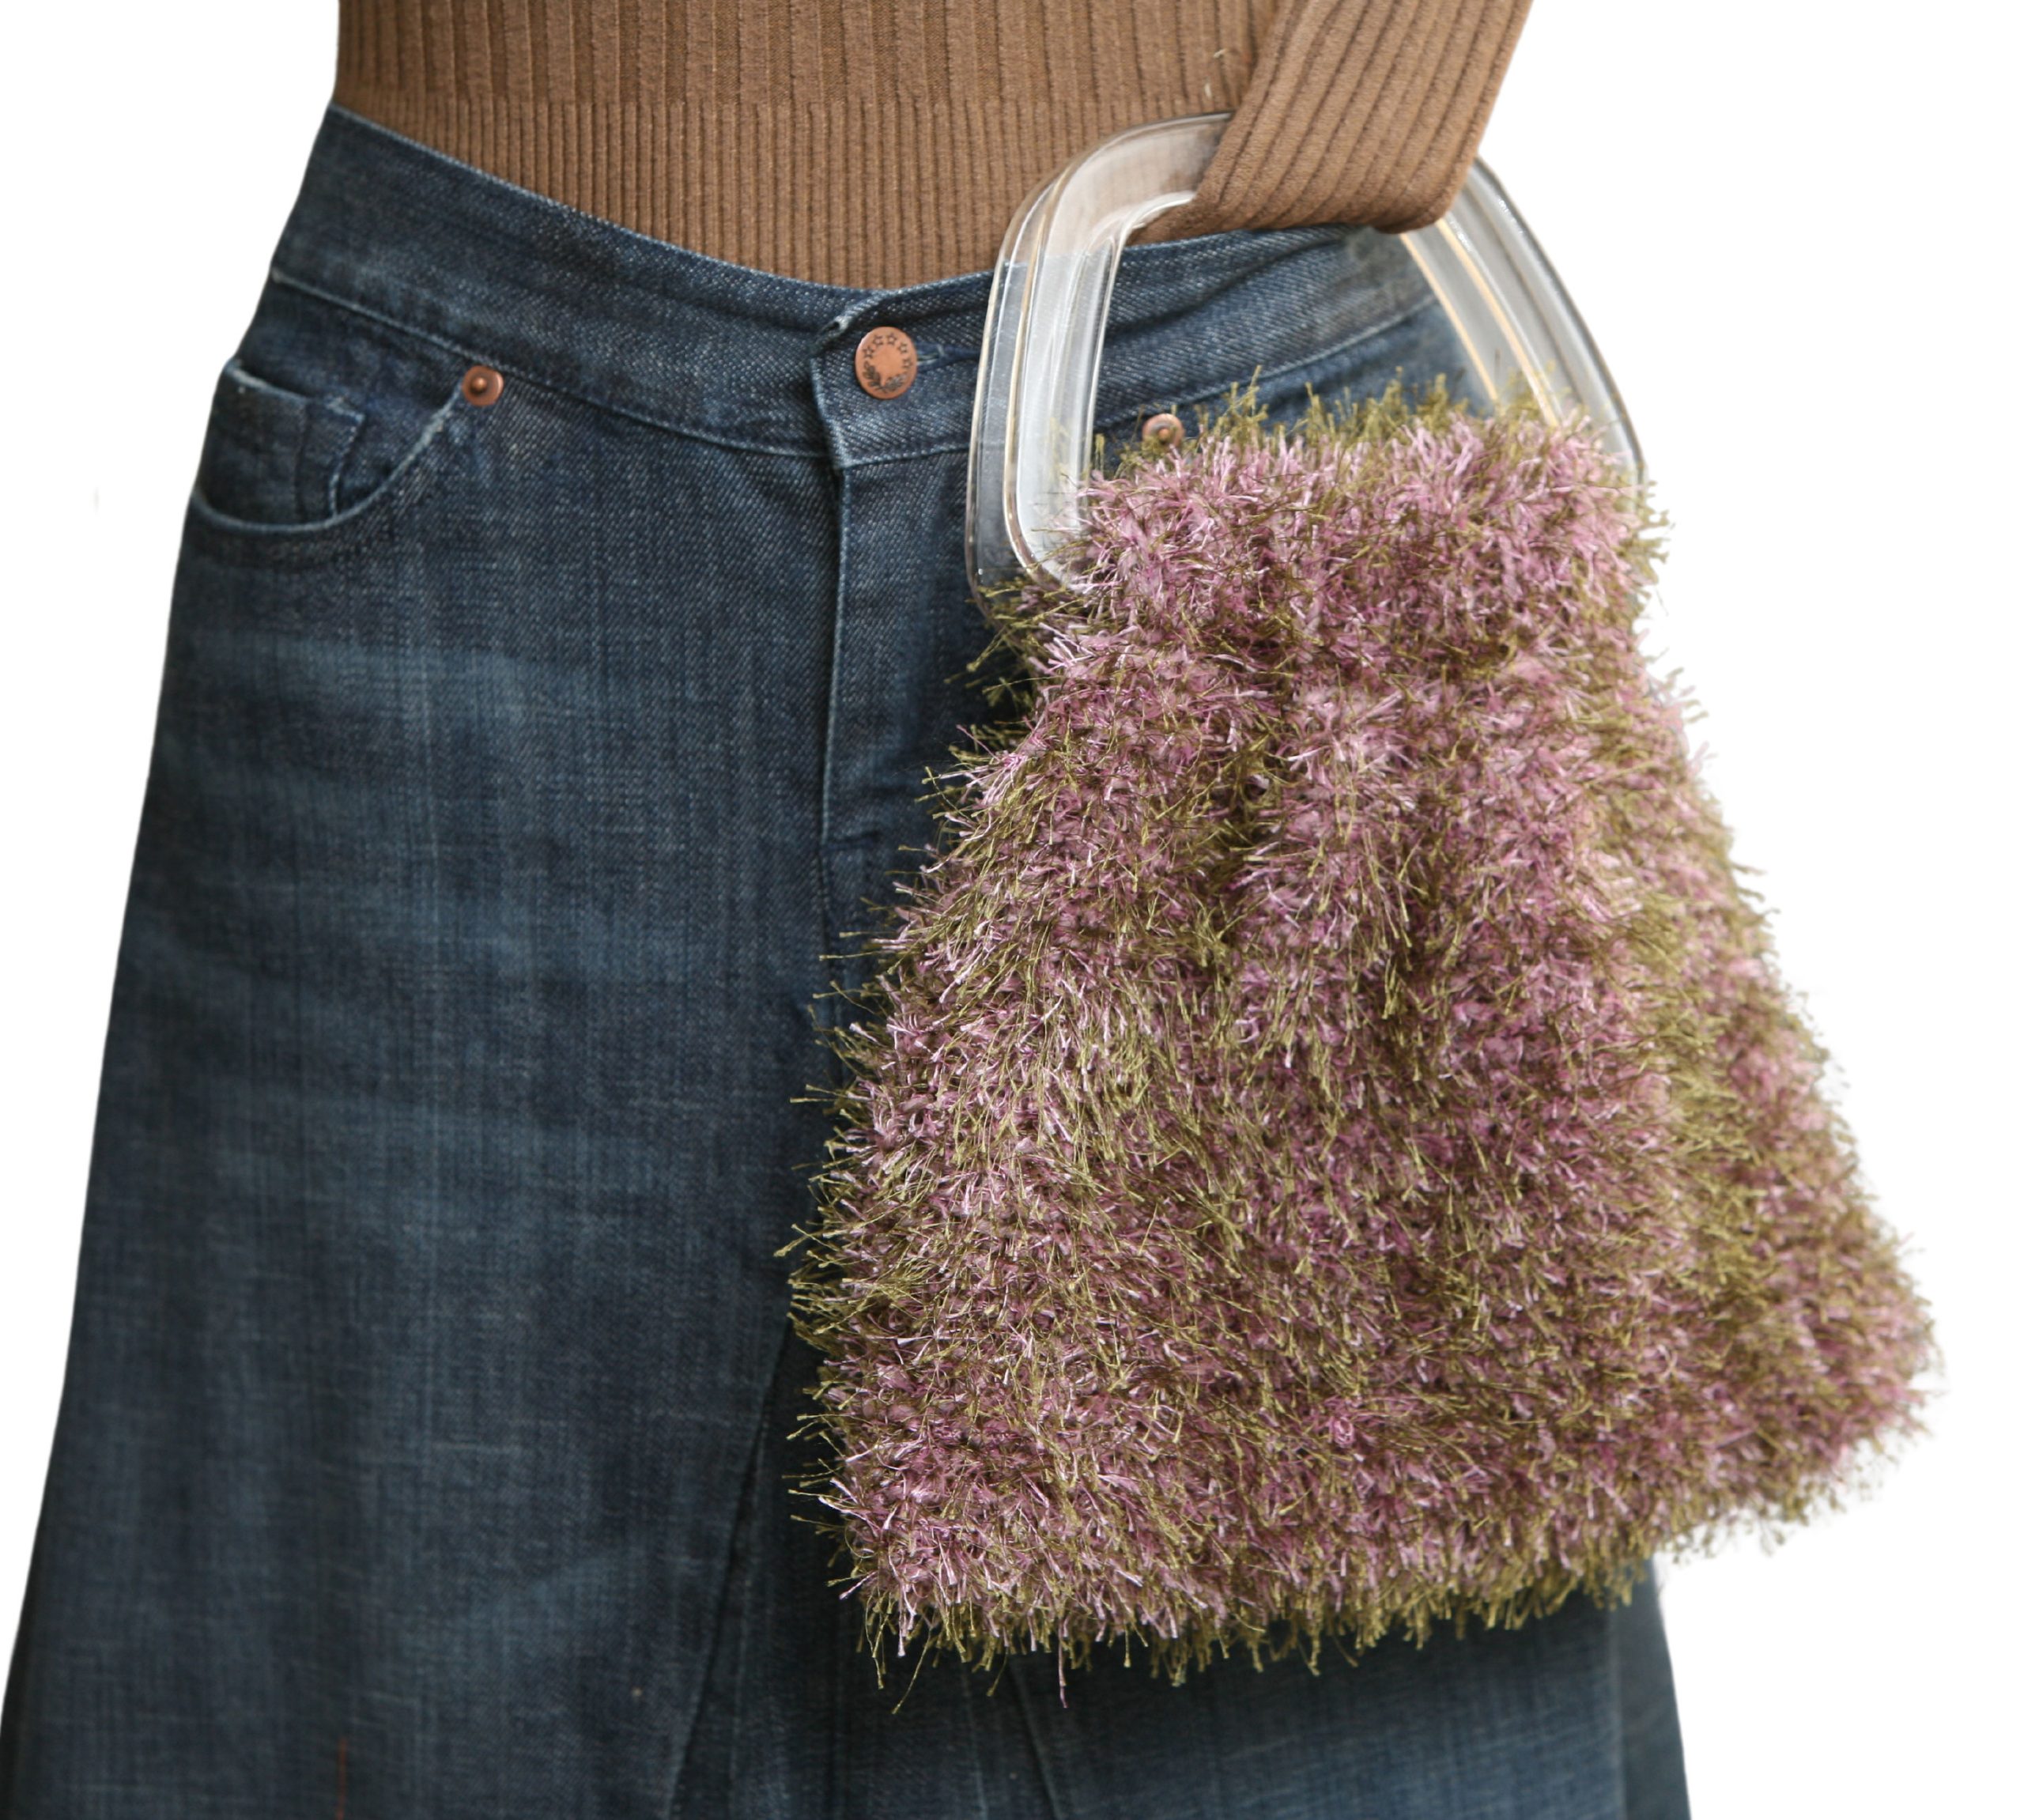 Knitted Bag 5